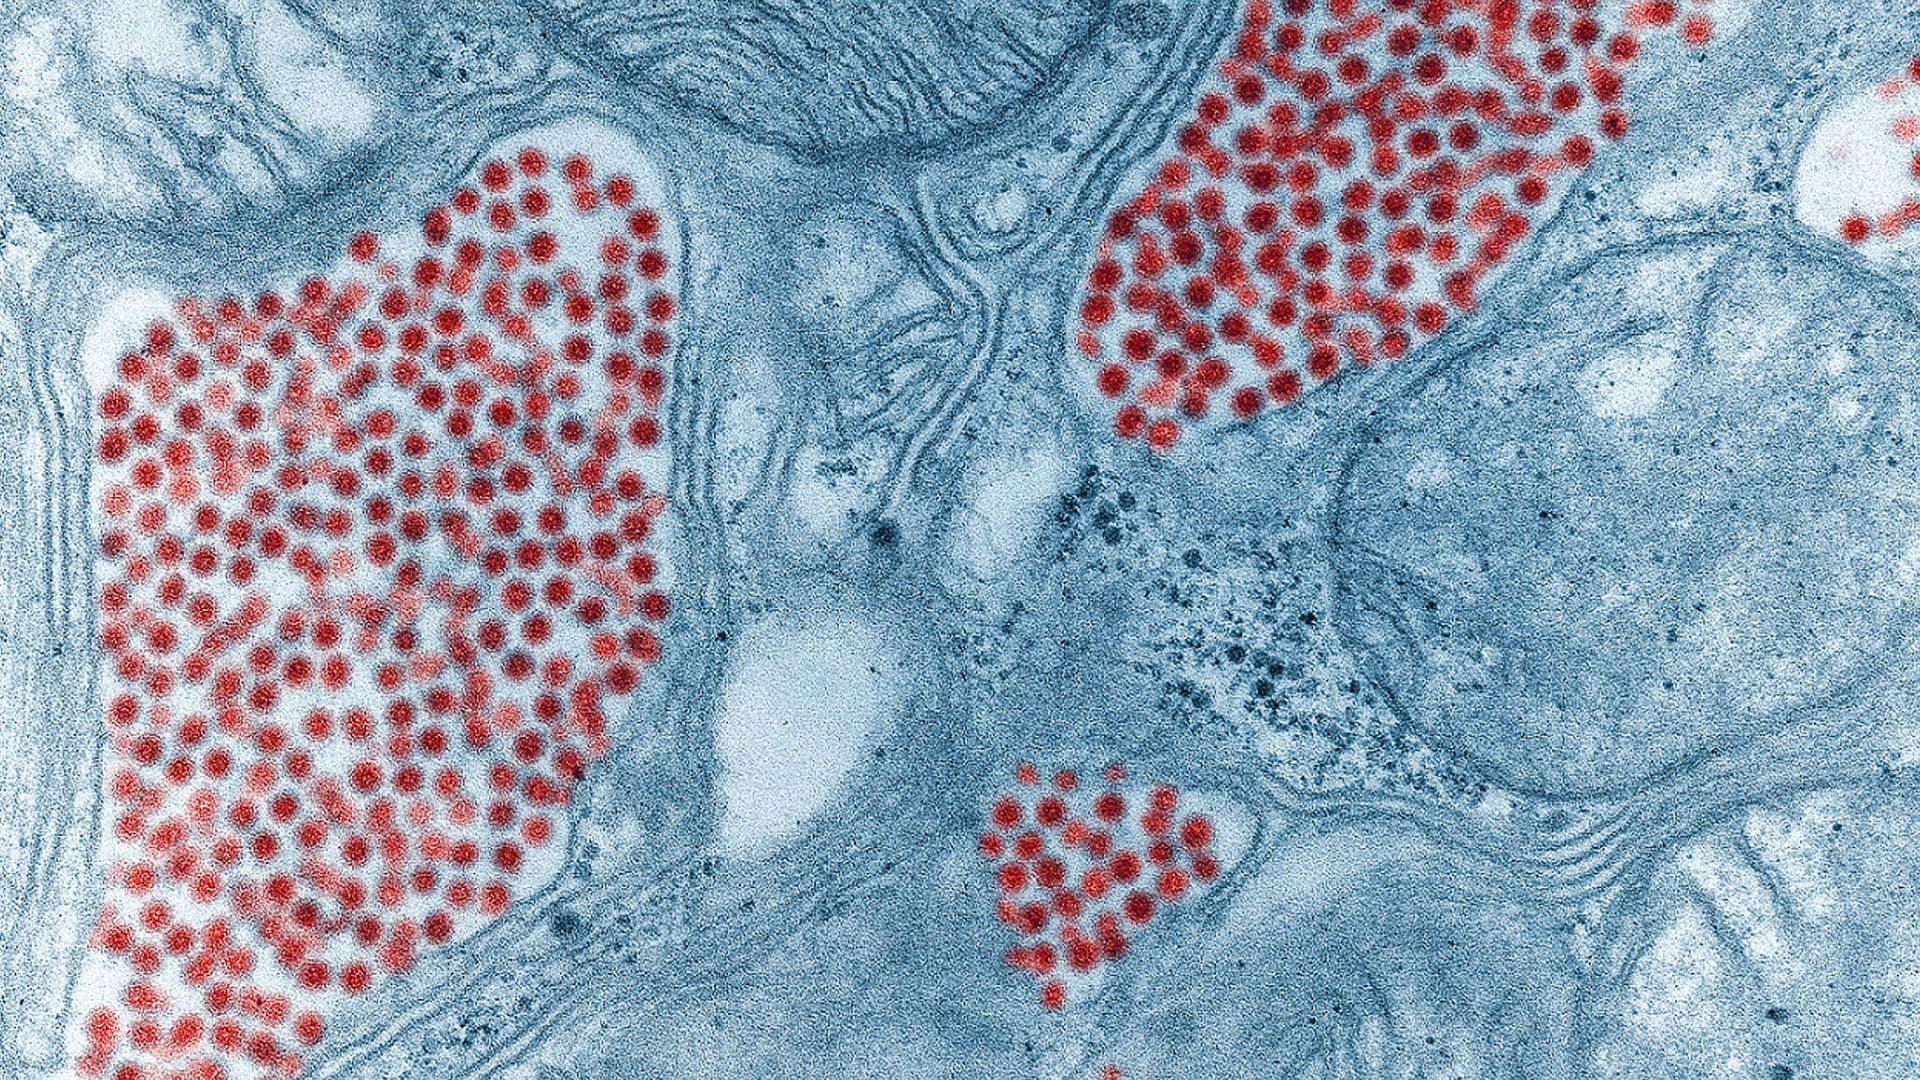  Colorized electron microscope image of mosquito salivary gland tissue infected by the EEE virus